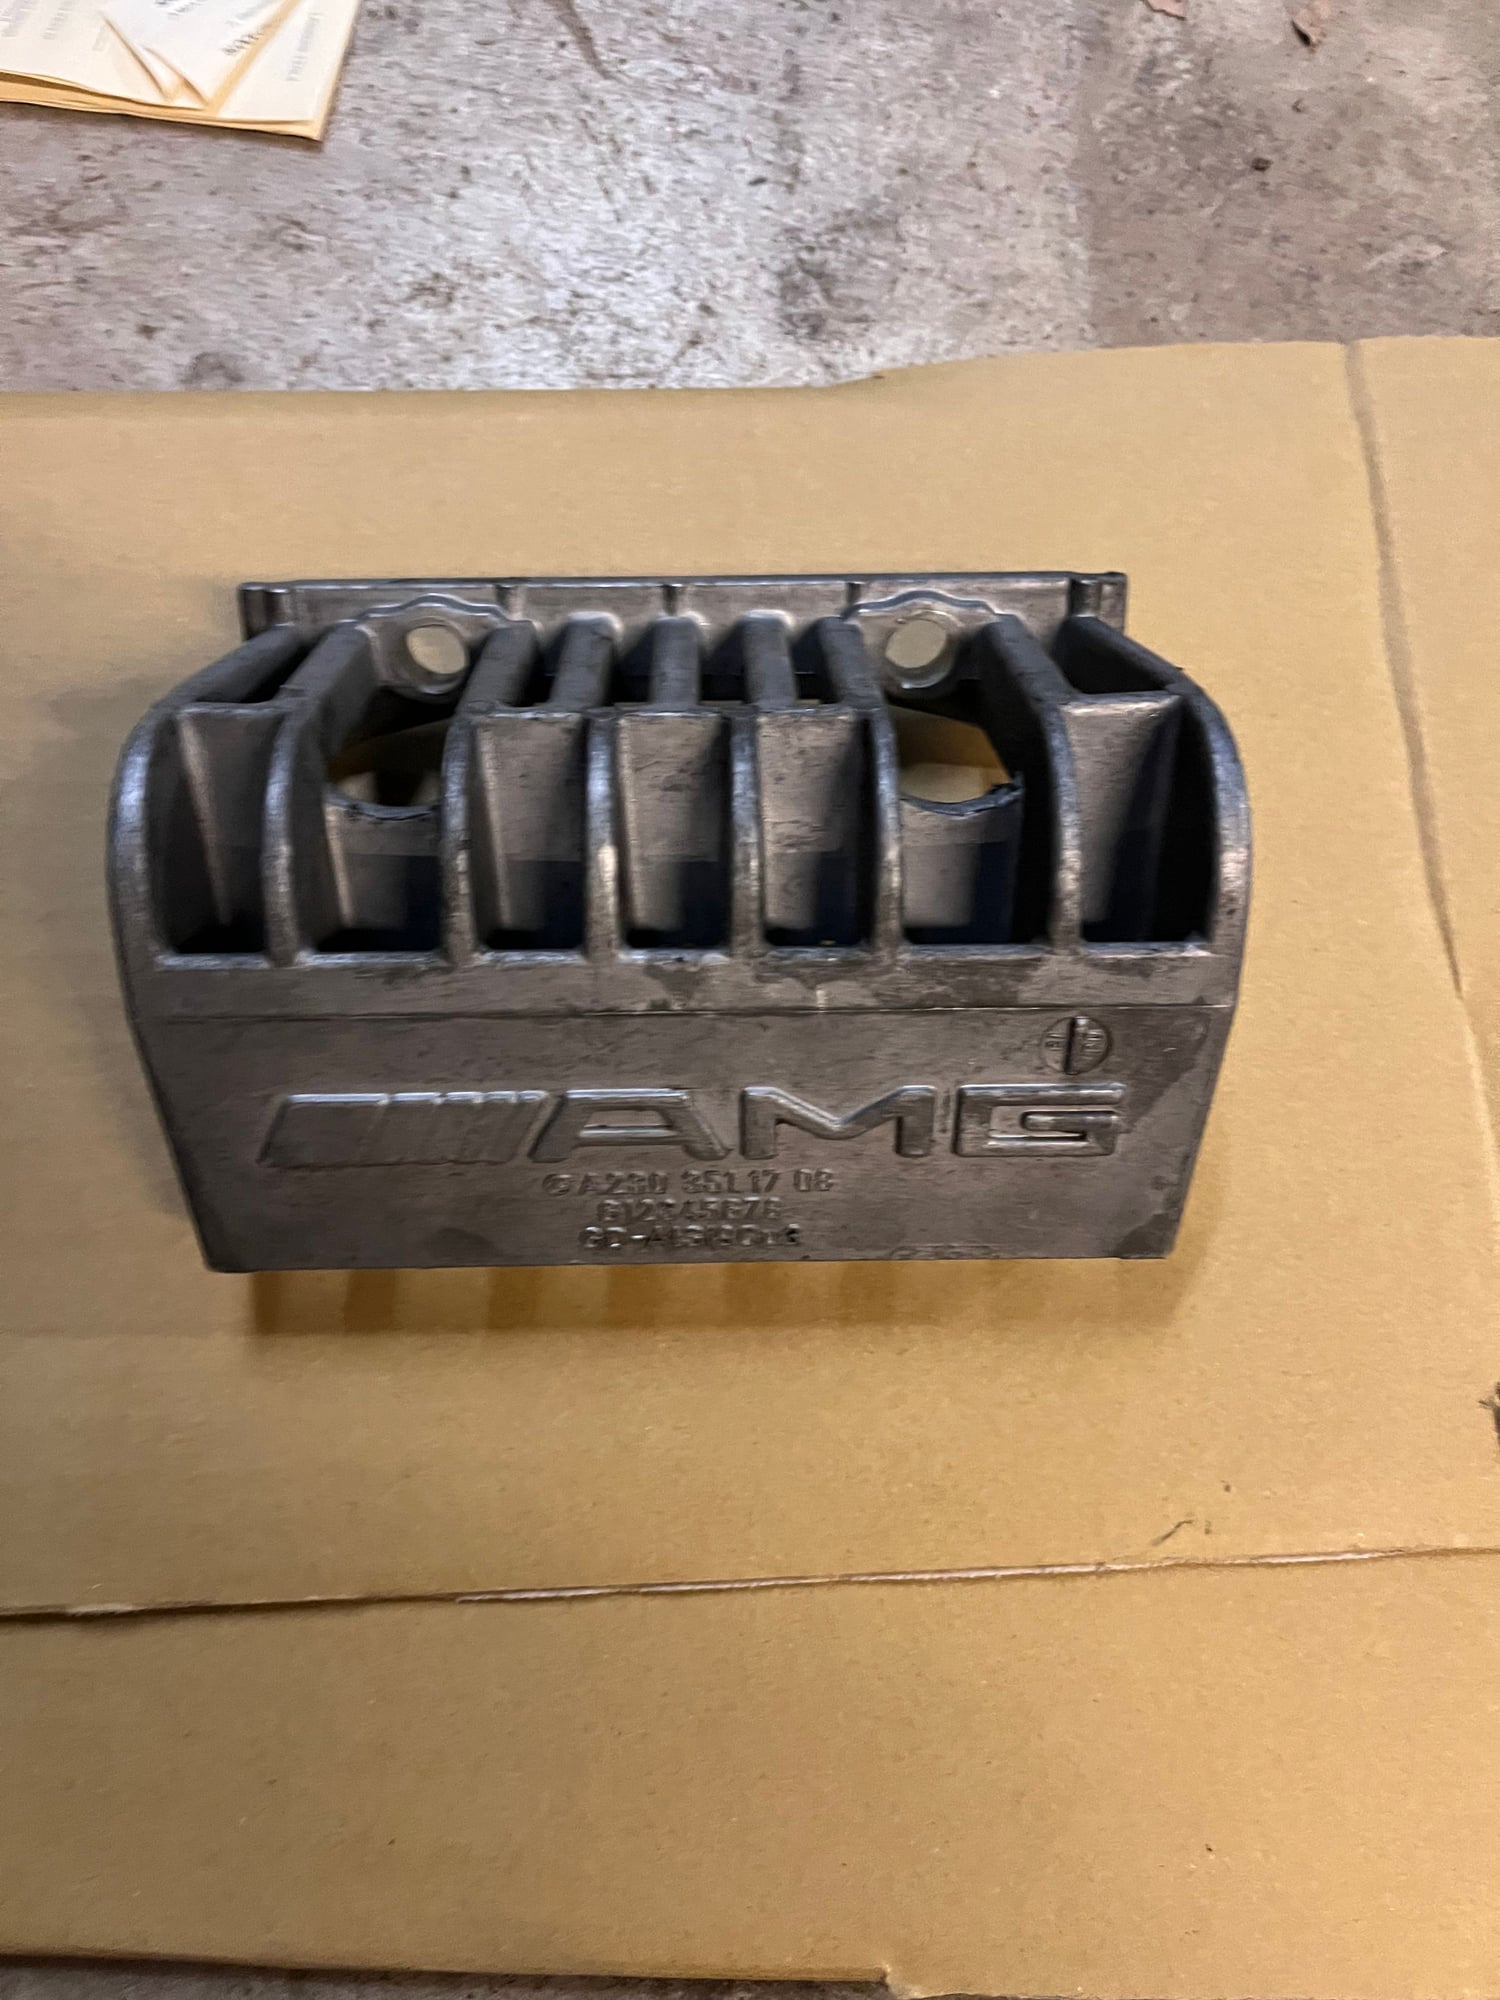 Drivetrain - AMG Differential Heat Sink - Used - 2003 to 2007 Mercedes-Benz S55 AMG - Houston, TX 77001, United States